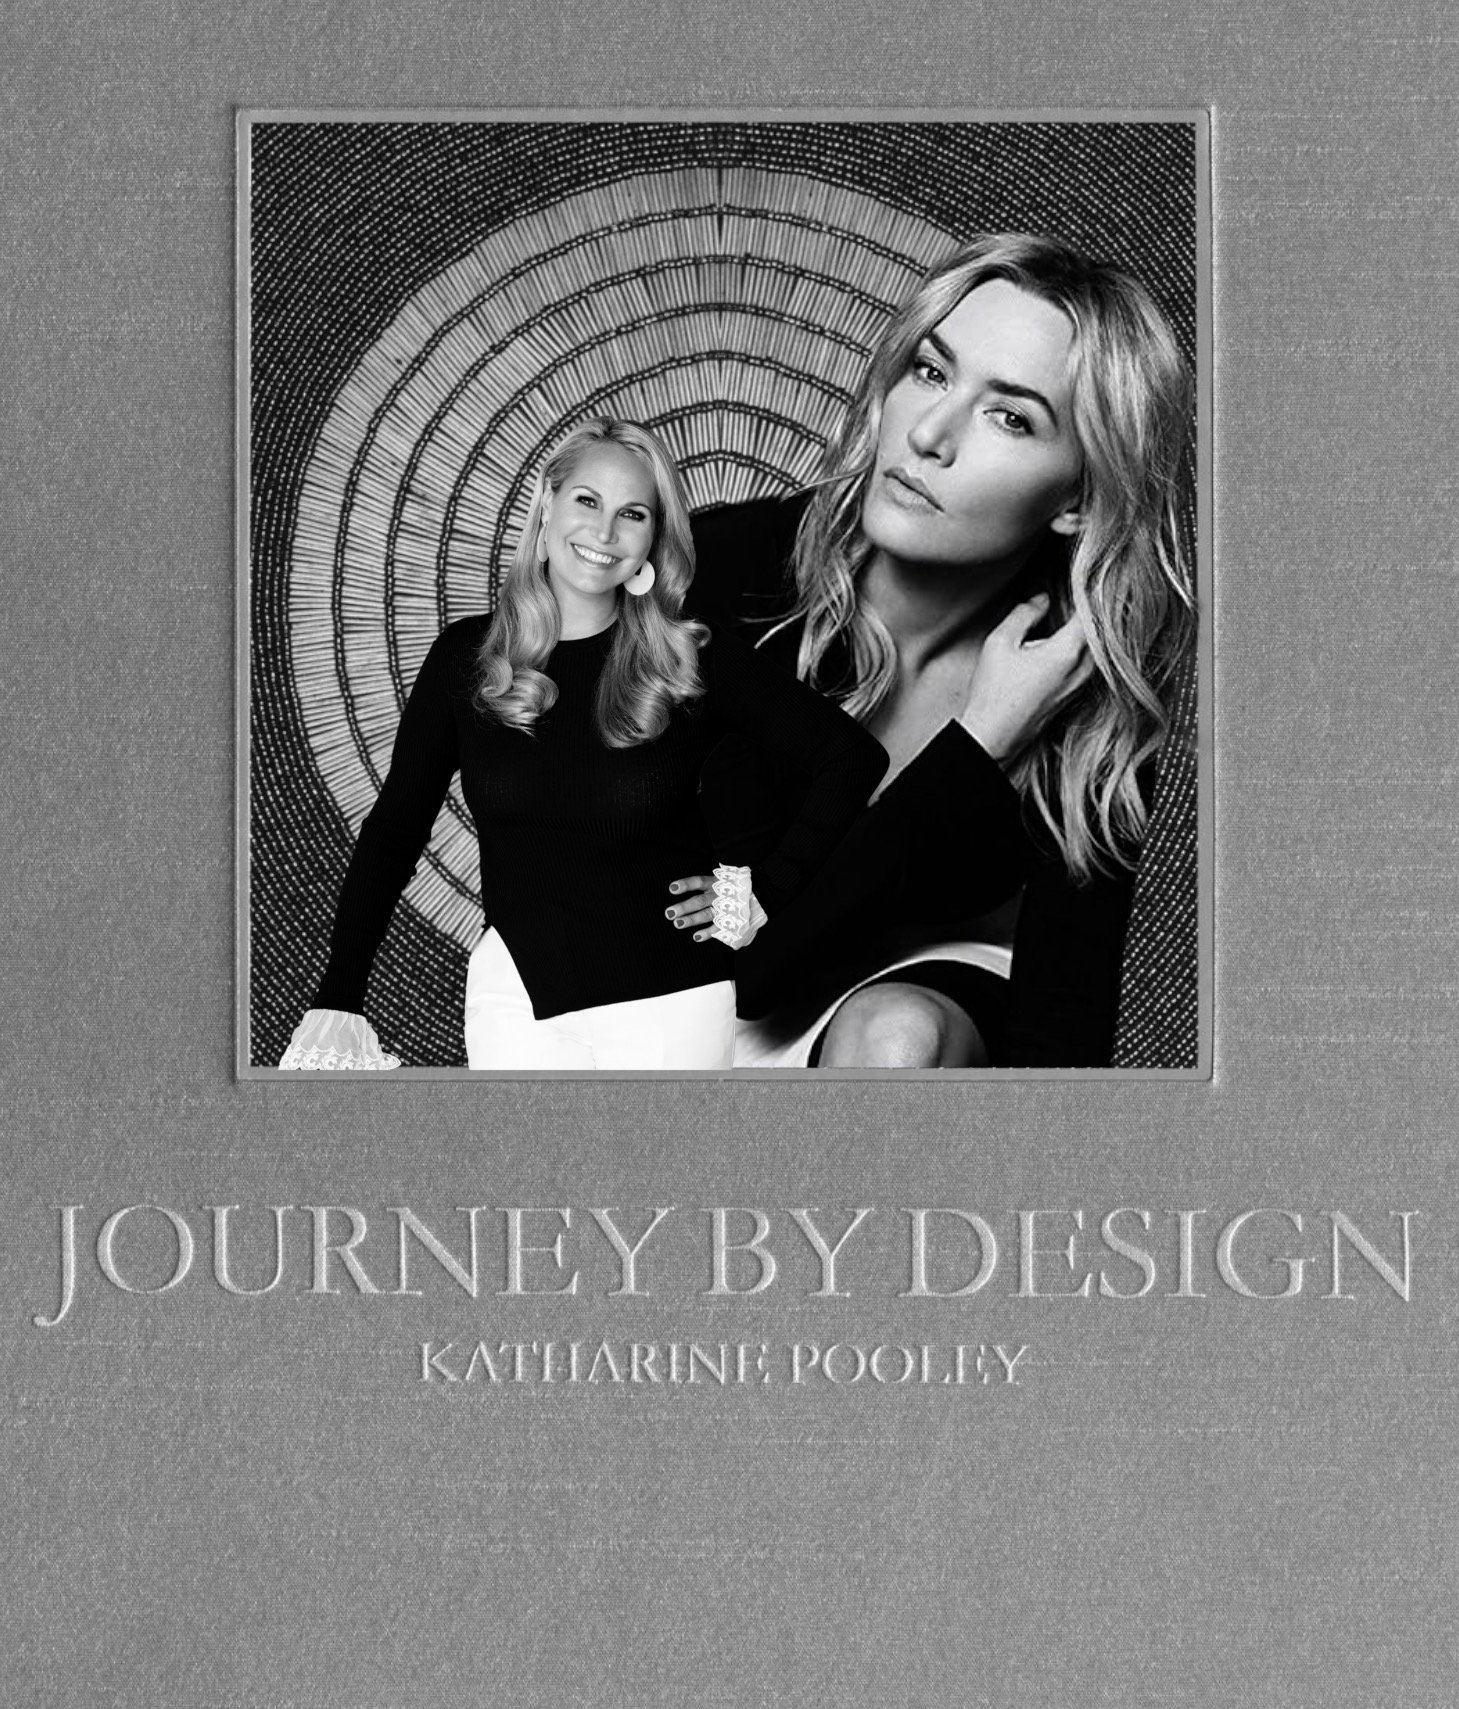 Journey By Design By Katharine Pooley | Narrated by Kate Winslet